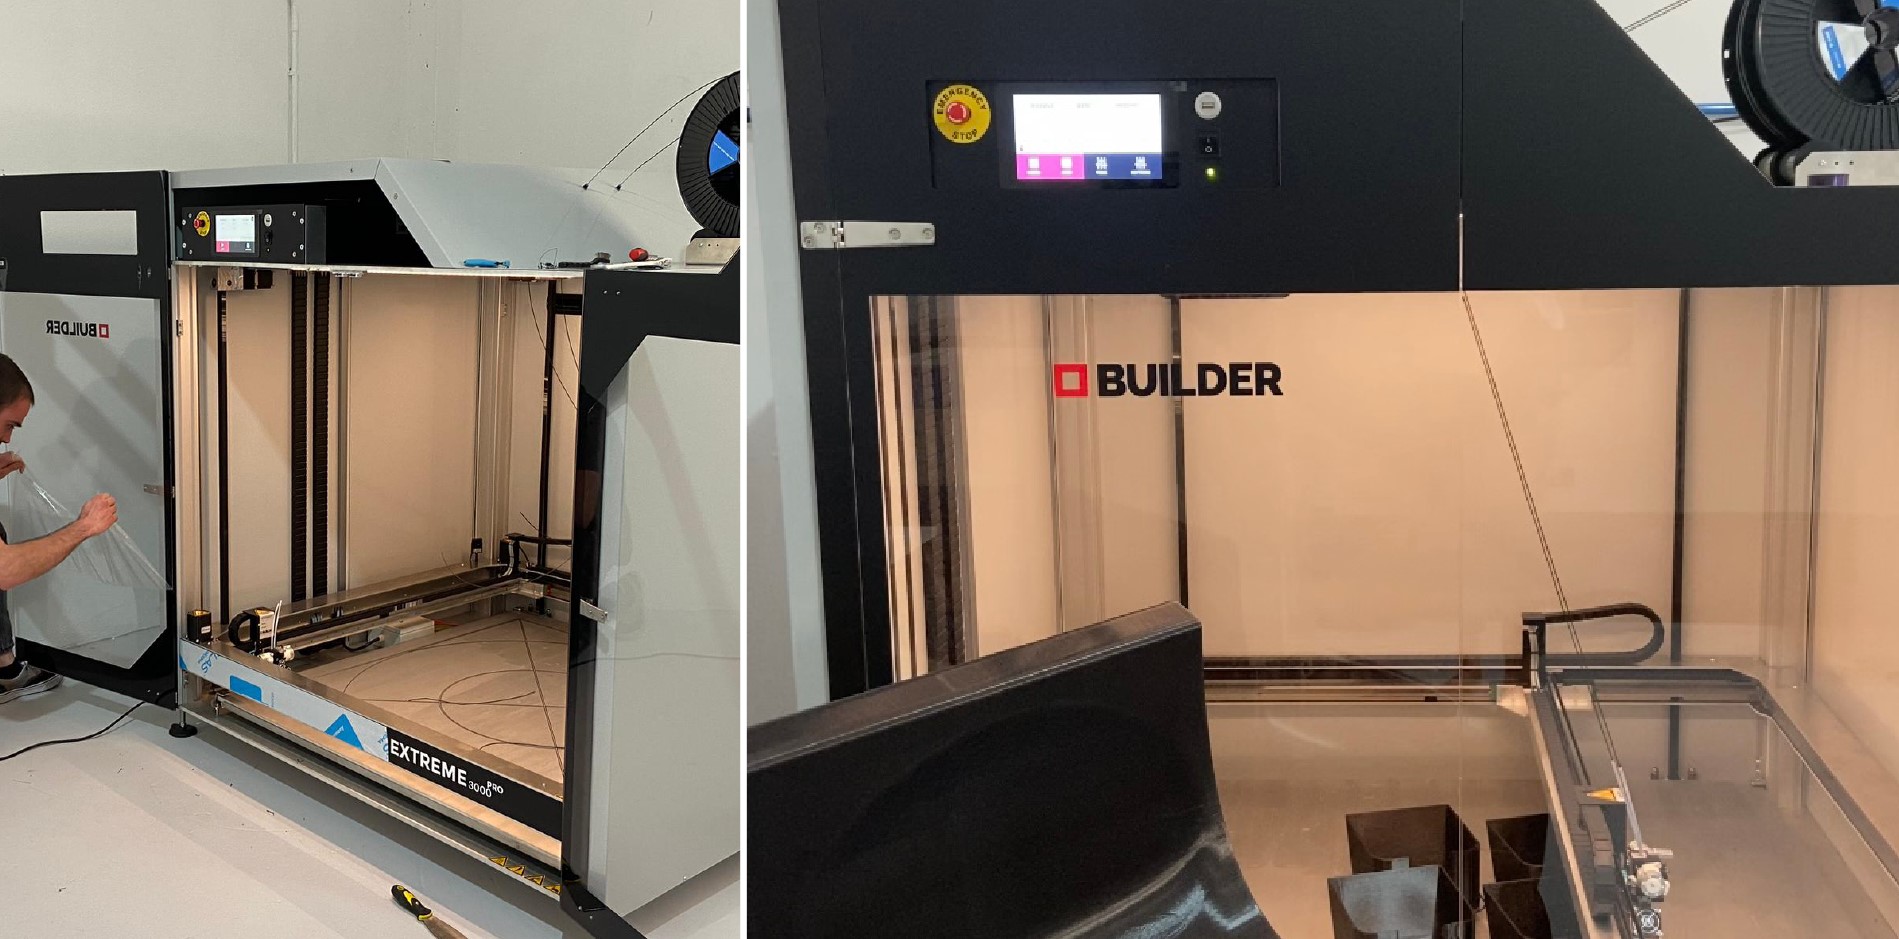 MAUSA introduces the new 3D BUILDER BIG FORMAT machine, which enables printing large-sized parts in a single piece